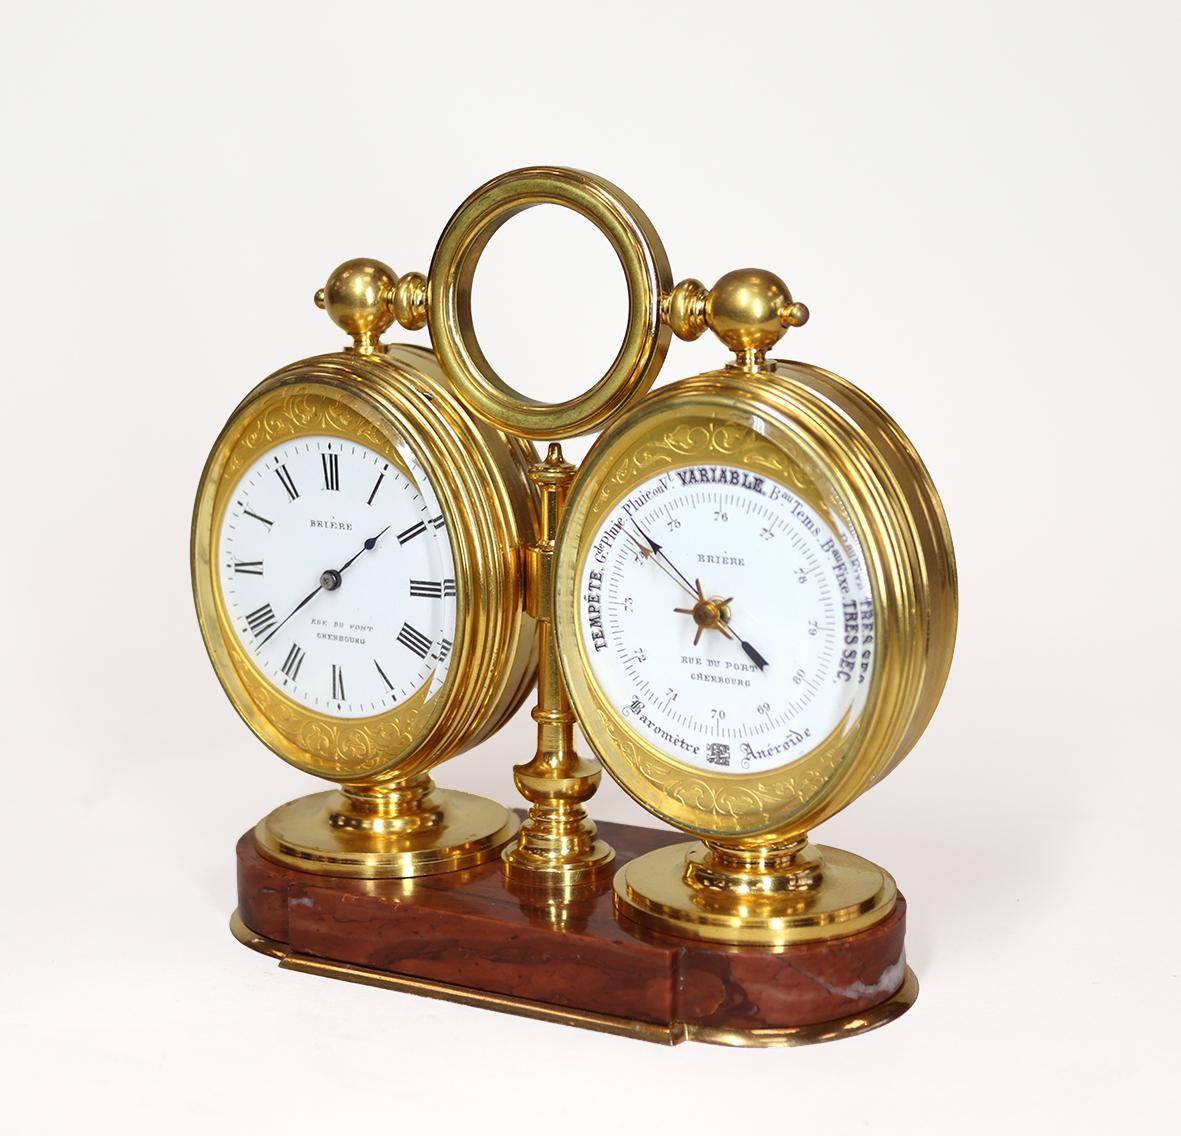 A very fine desk compendium, comprising an eight day timepiece, barometer and thermometer, in a gilded twin oval case, mounted on a rouge marble base with a rotating circular carrying loop.  The reverse has a glazed back to the clock revealing an